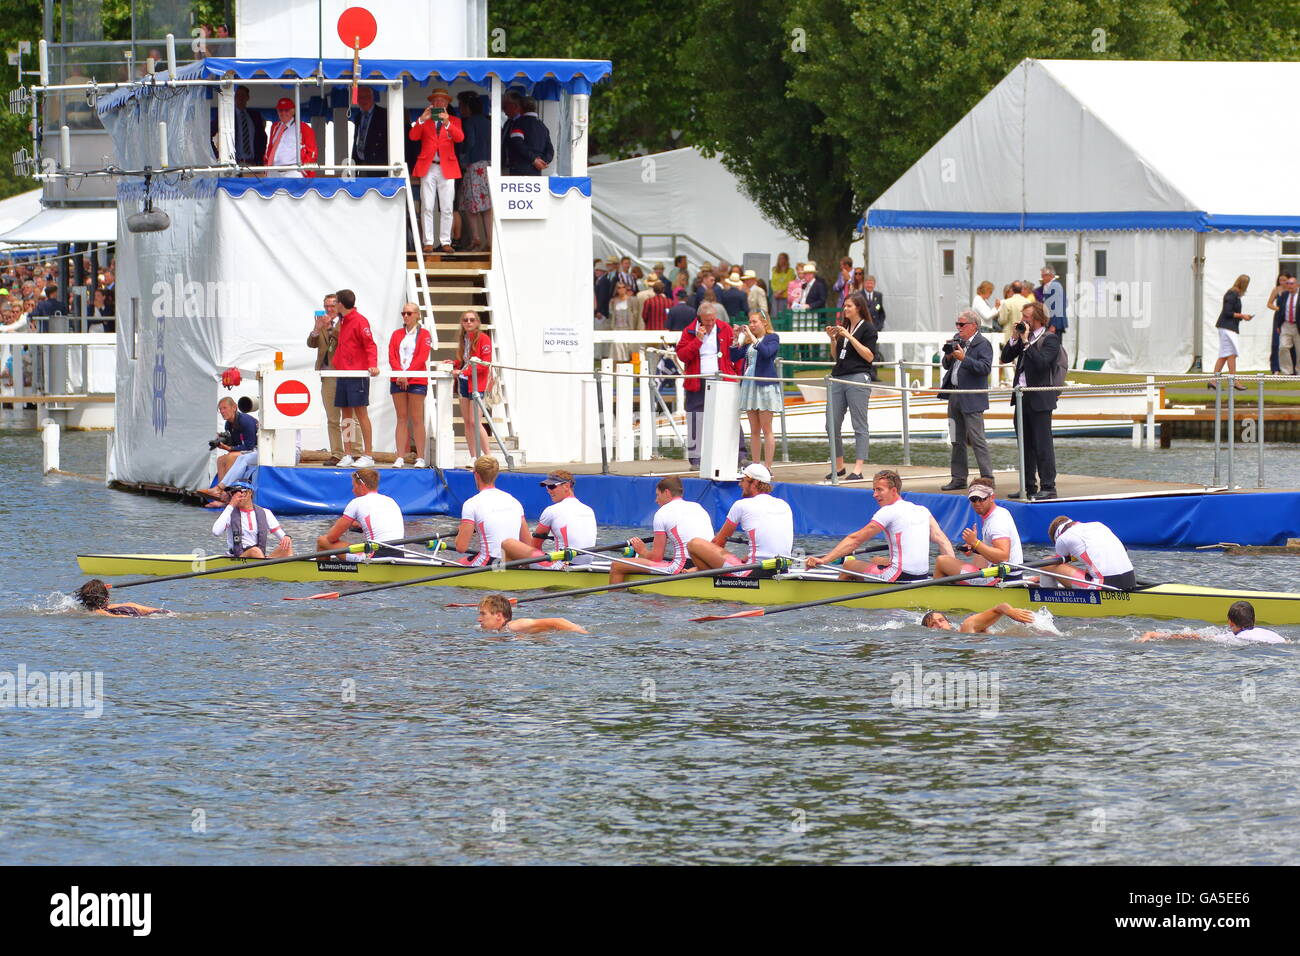 Rowers from all over the world came to the annual Henley Royal Regatta 2016. Nereus supporters swim towards their crew to congratulate them to their win. Stock Photo